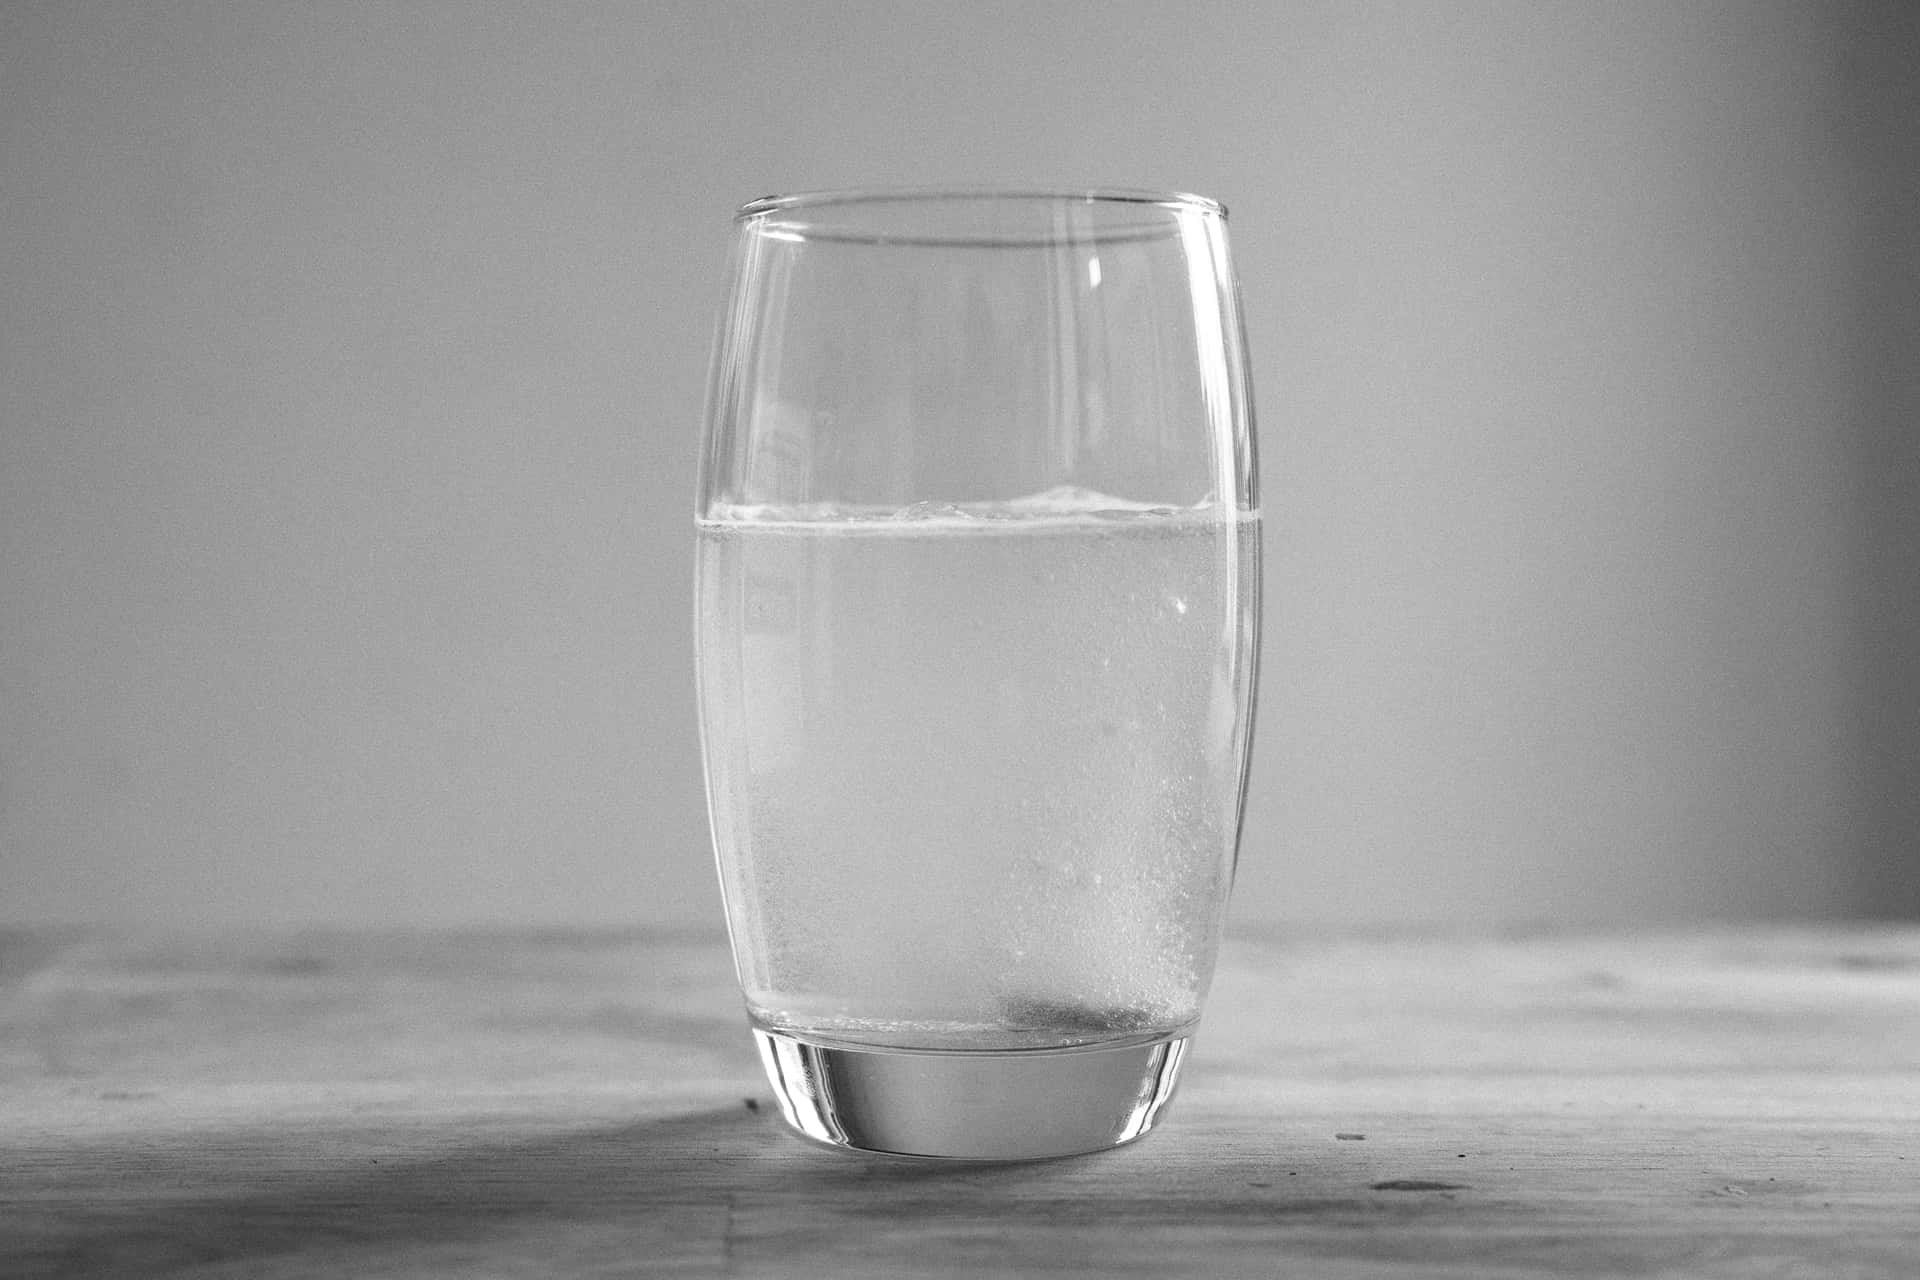 Download A Glass Of Water On A Table